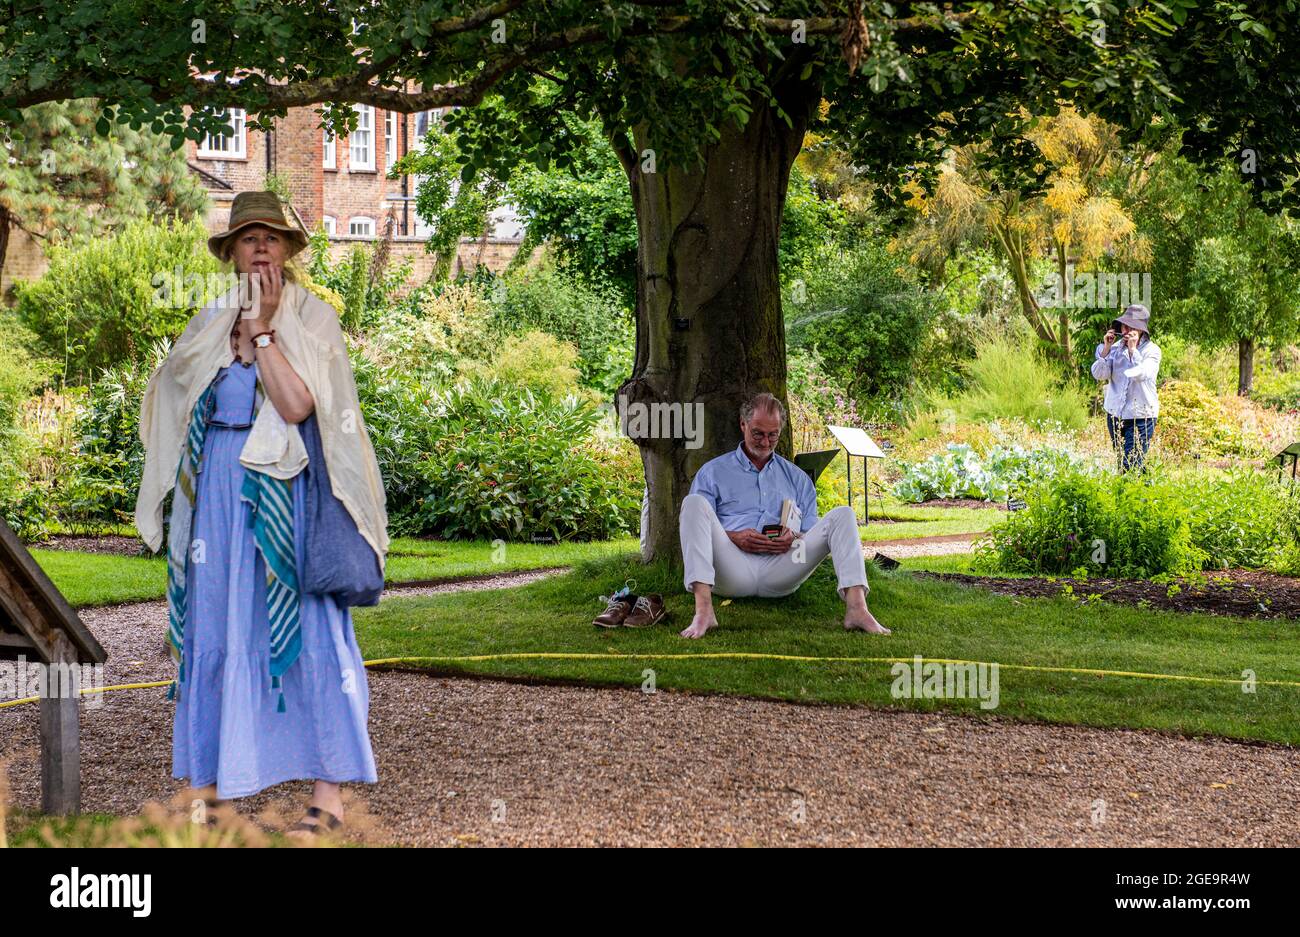 A woman looking puzzled in the foreground while behind her a man is reading by a tree and another woman is talking on her phone in the Chelsea Physic Garden in Central London. Stock Photo